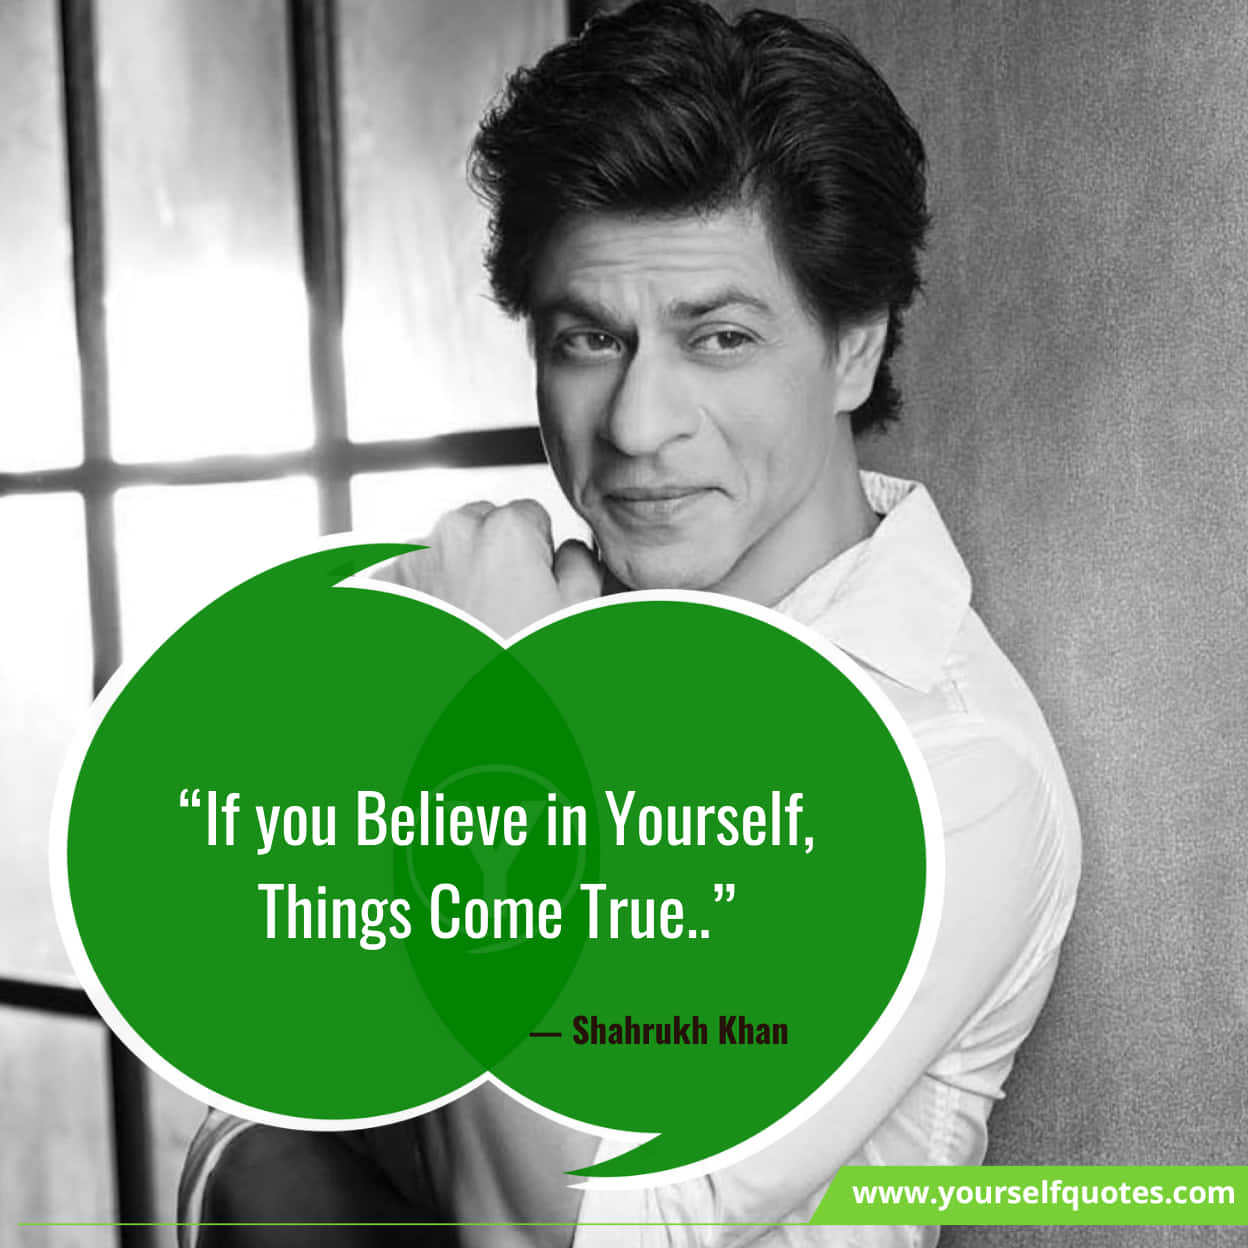 Shahrukh Khan Quotes from Movies